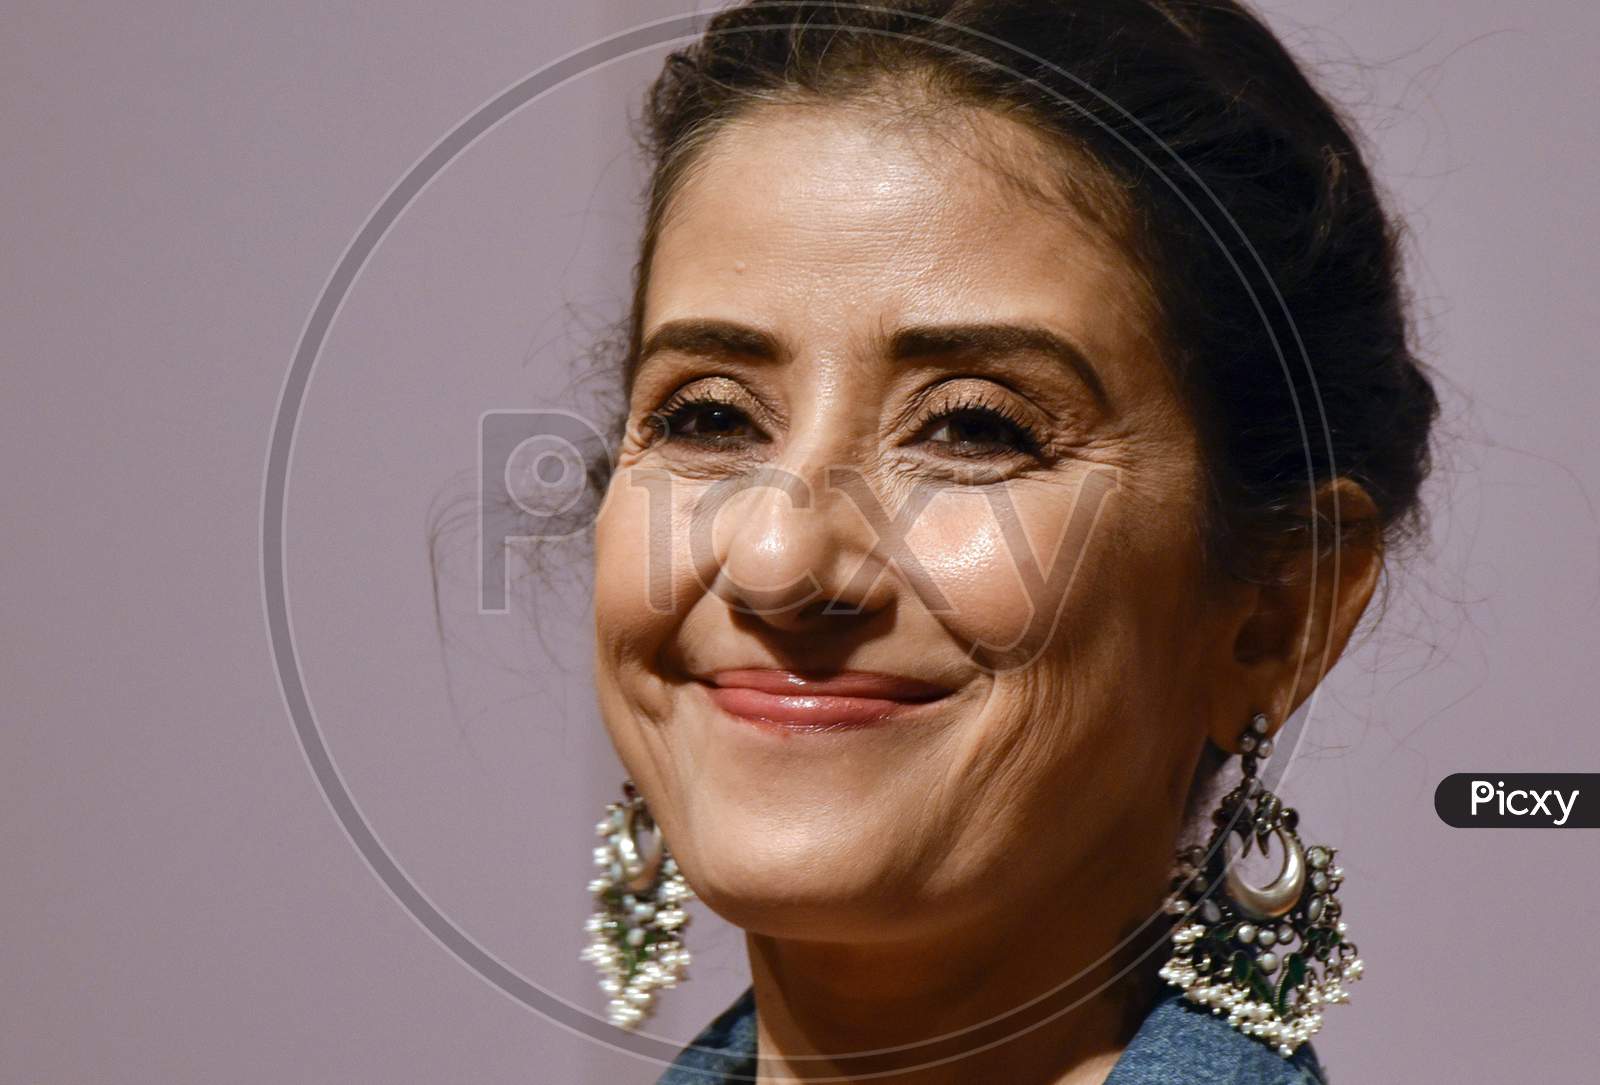 Bollywood Actress Manisha Koirala During 3Rd Brahmaputra Literary Festival, Organised By Publication Board Assam And Supported By The Assam Government At Sankardev Kalakhetra In Guwahati, Assam On February 10, 2019.